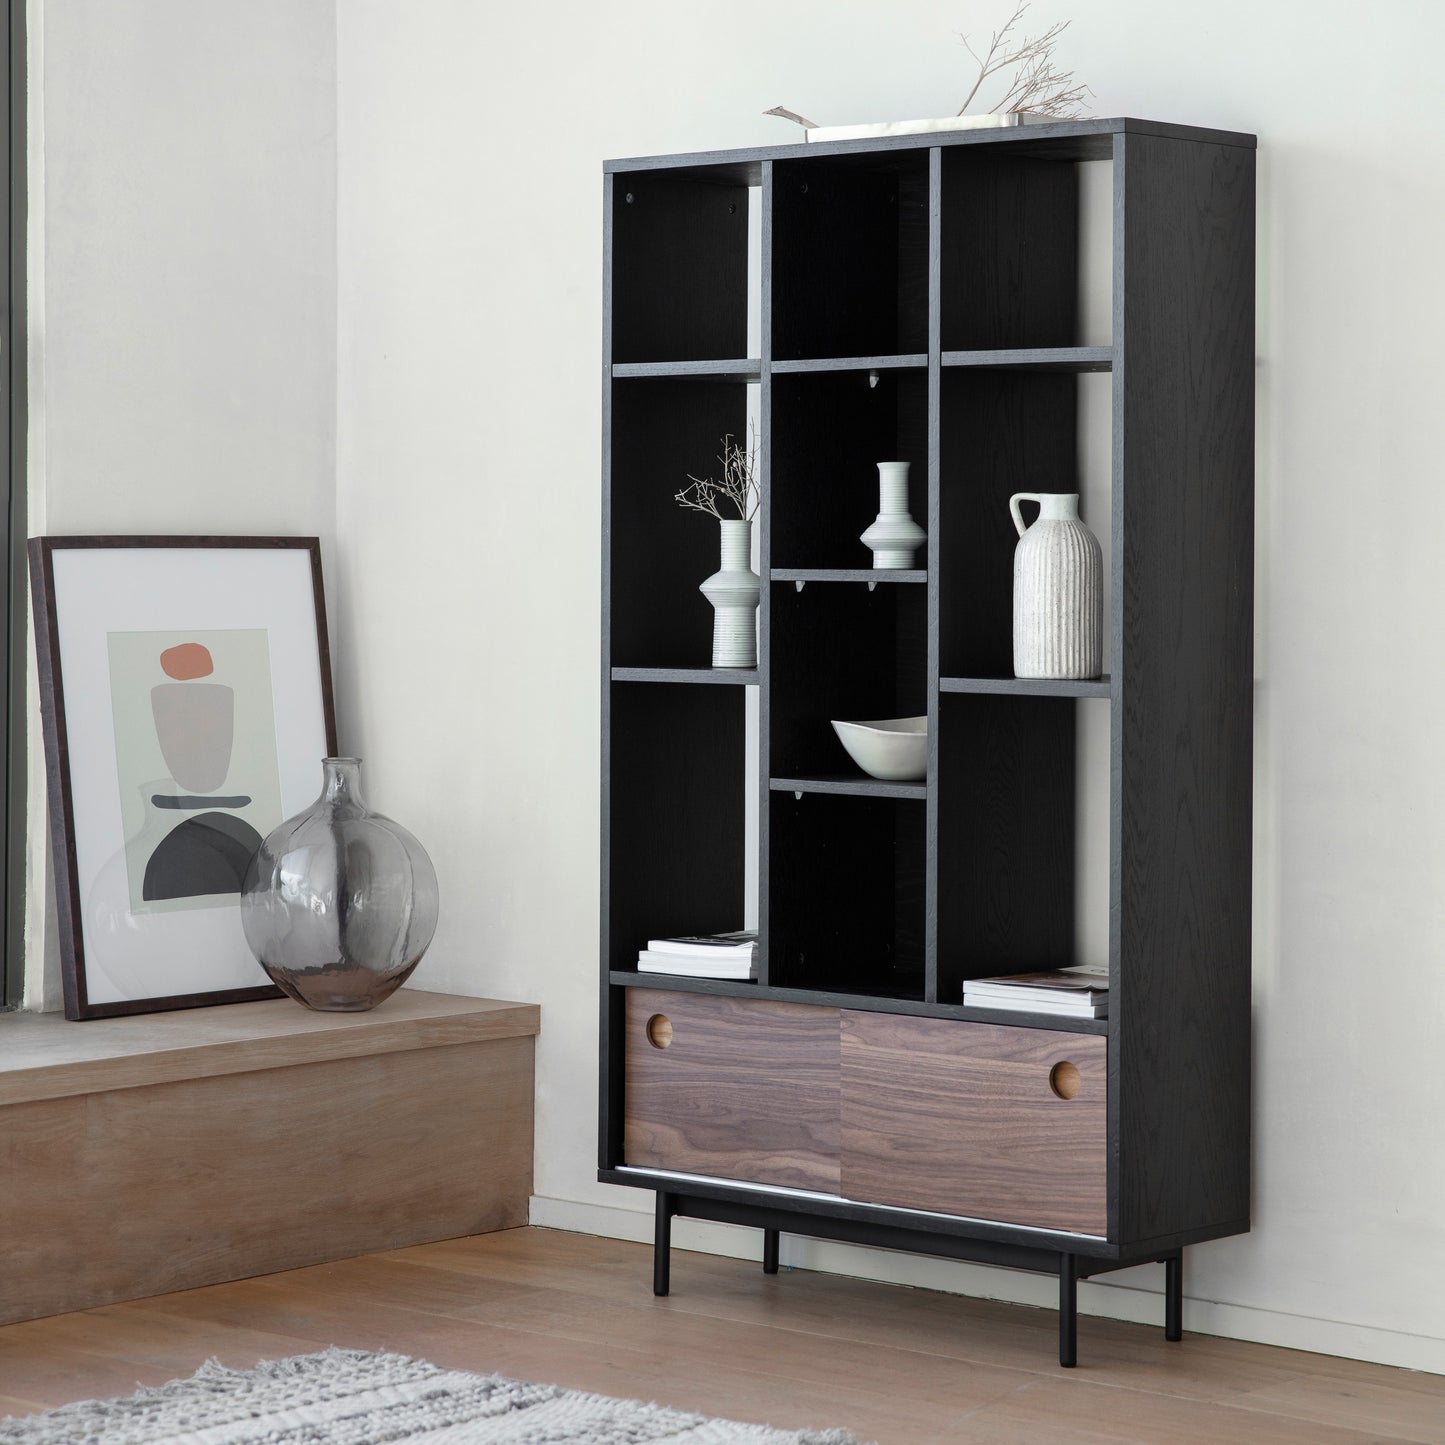 A Barbican Display Unit by Kikiathome.co.uk, part of the interior decor, is placed in a room with a vase.